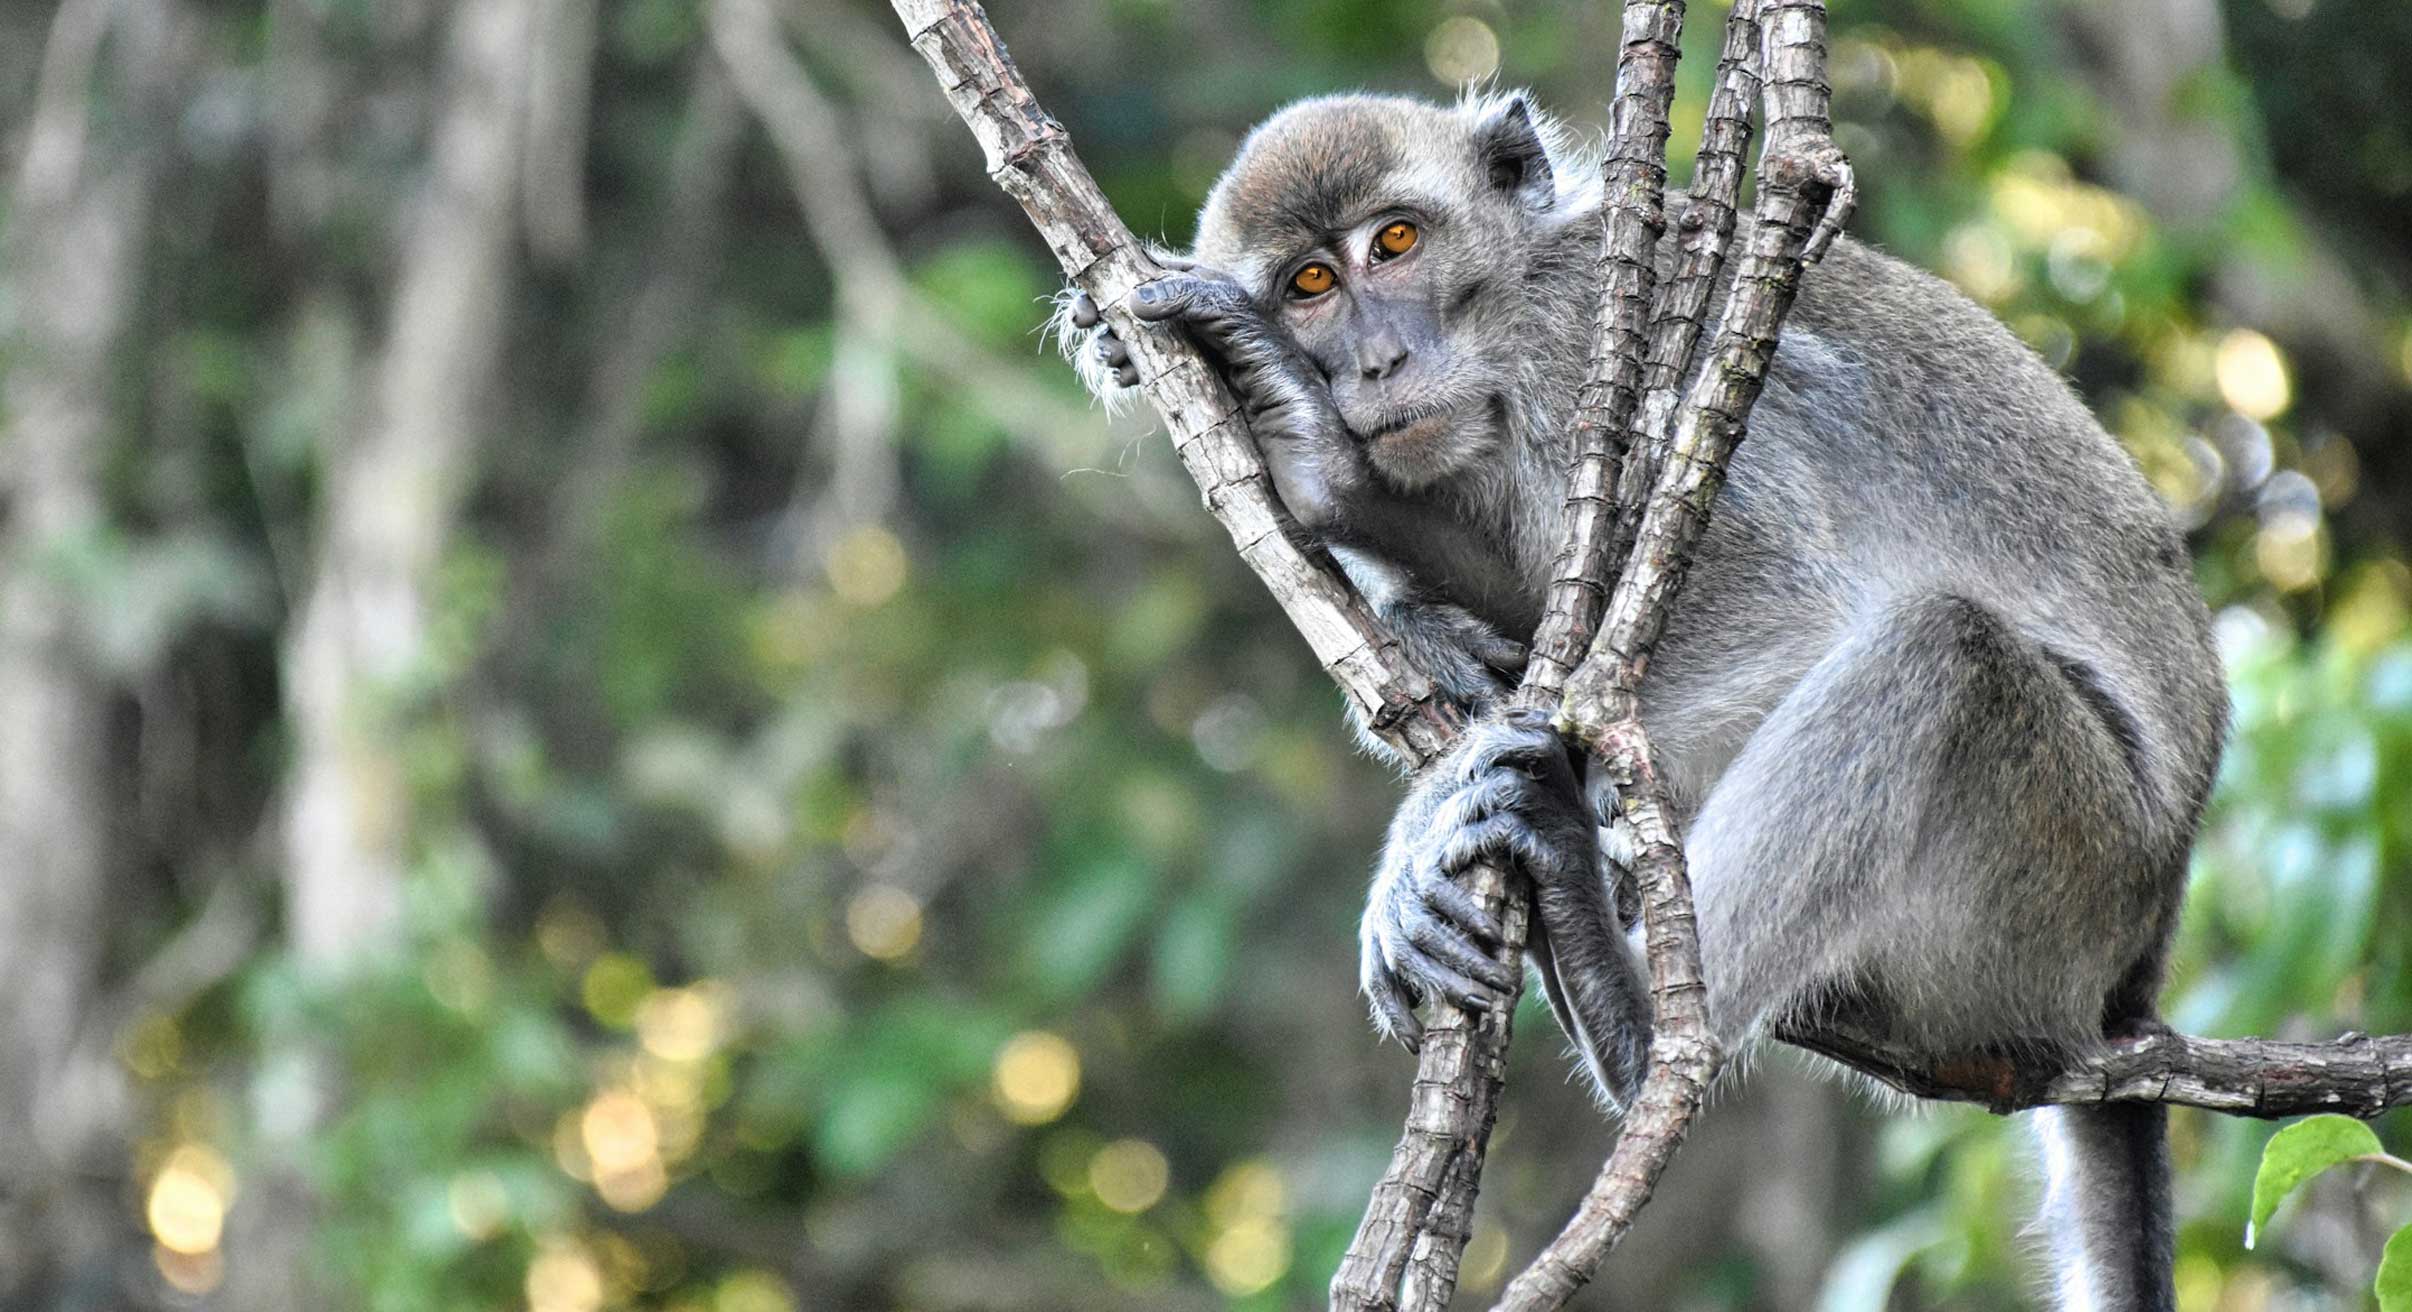 Long-tailed macaque in Borneo